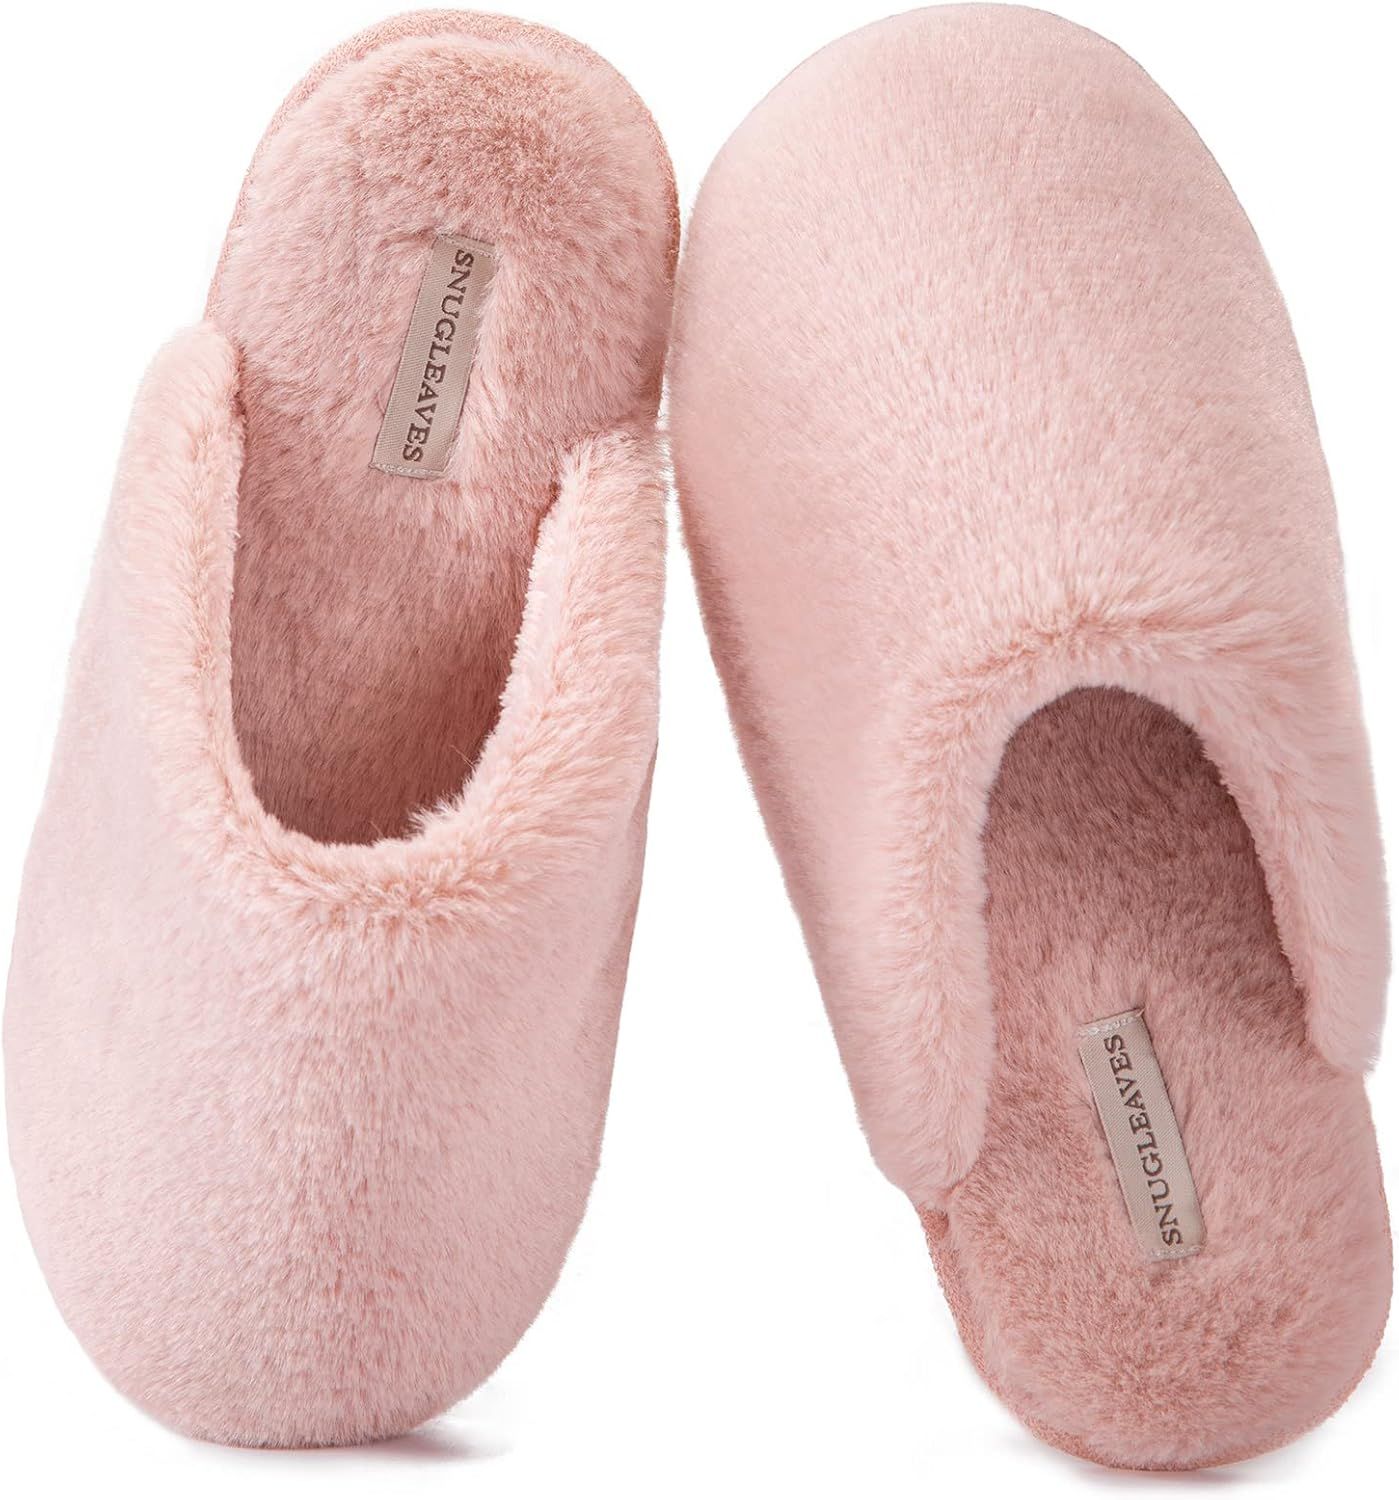 Snug Leaves Women's Fuzzy House Memory Foam Slippers, Furry Faux Fur Lined Bedroom Shoes, Cozy Indoo | Amazon (US)